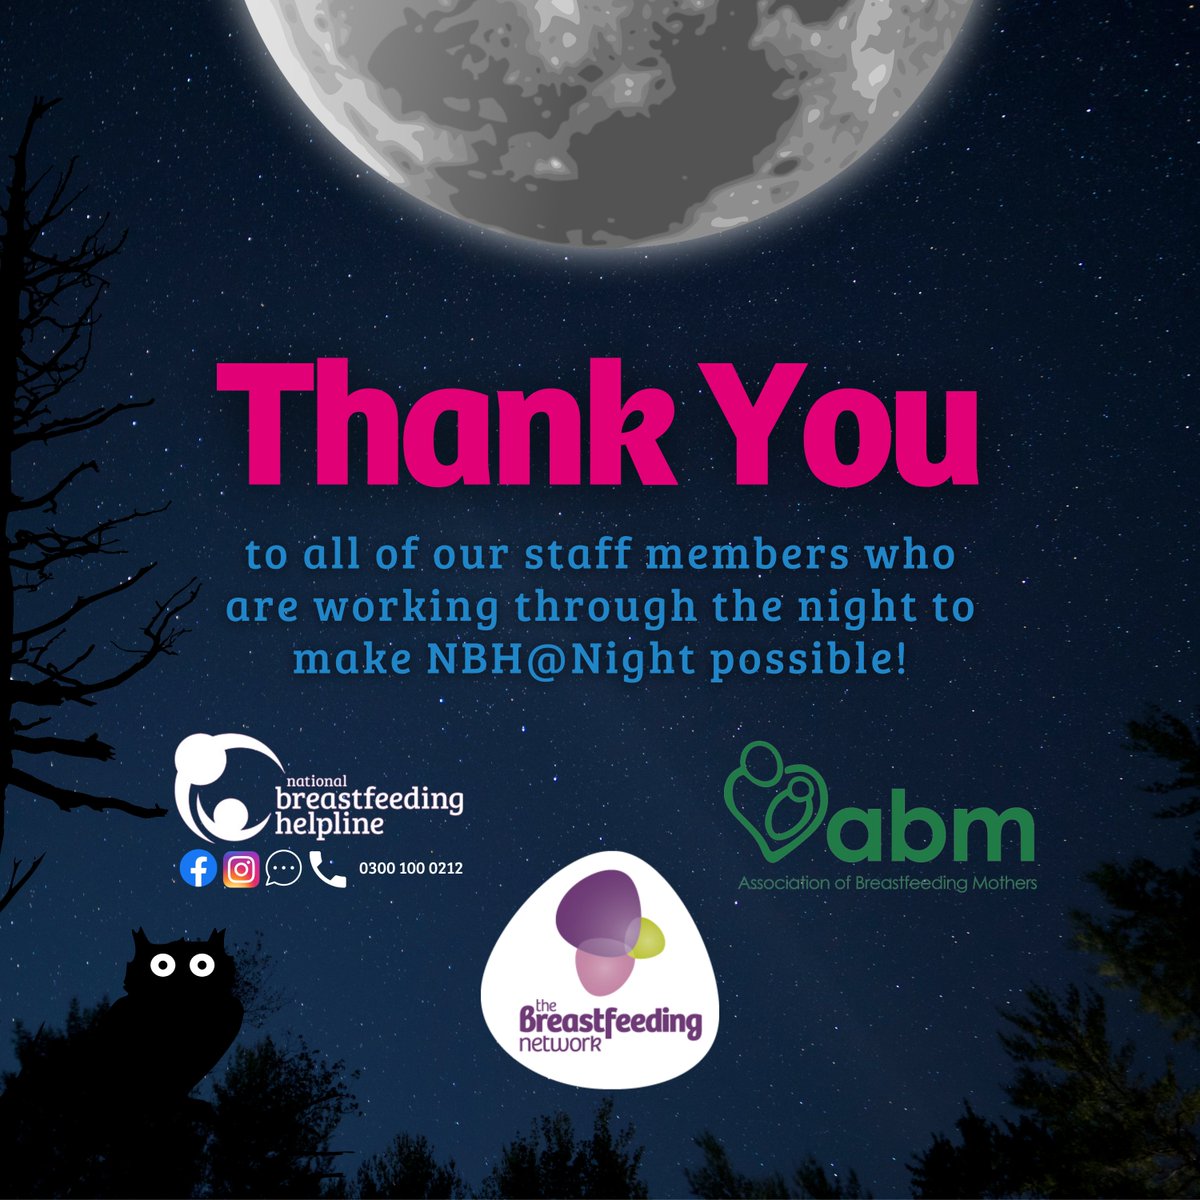 It's been a week since NBH@Night launched! So we thought we'd take the time to thank everyone who was involved in the planning/launch and our amazing staff members who are now working through the night to make this all possible 💜 @BFN_UK @AssocBfMothers #NBHAtNight #ThankYou